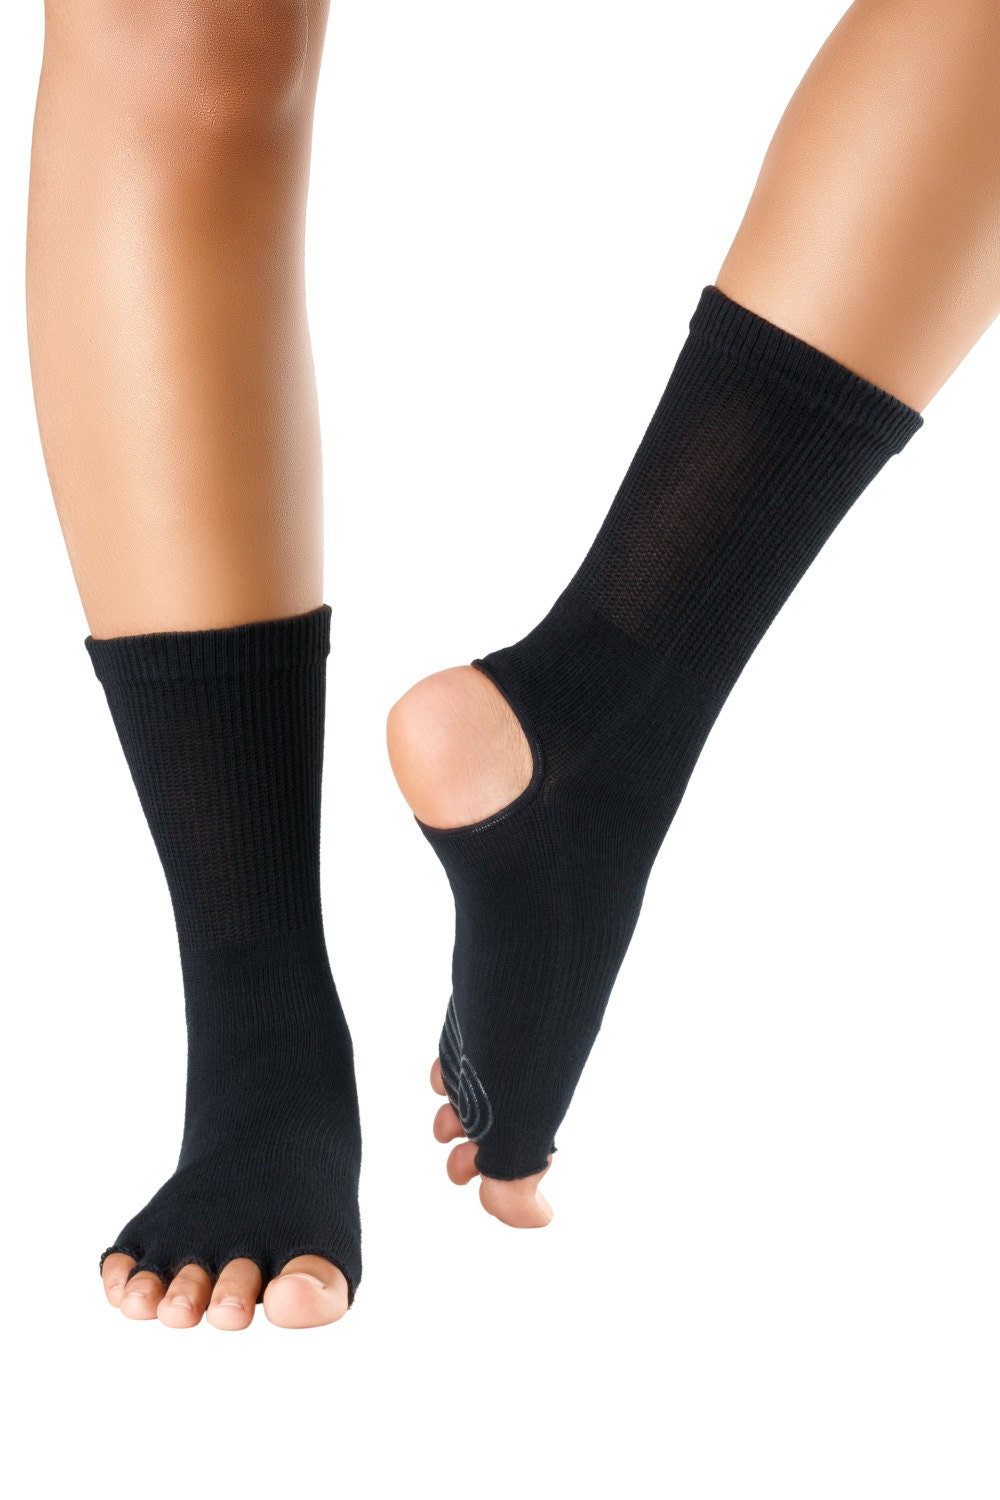 KNITIDO Open Five Toe and heel Yoga Socks by SoCalSportsConcepts